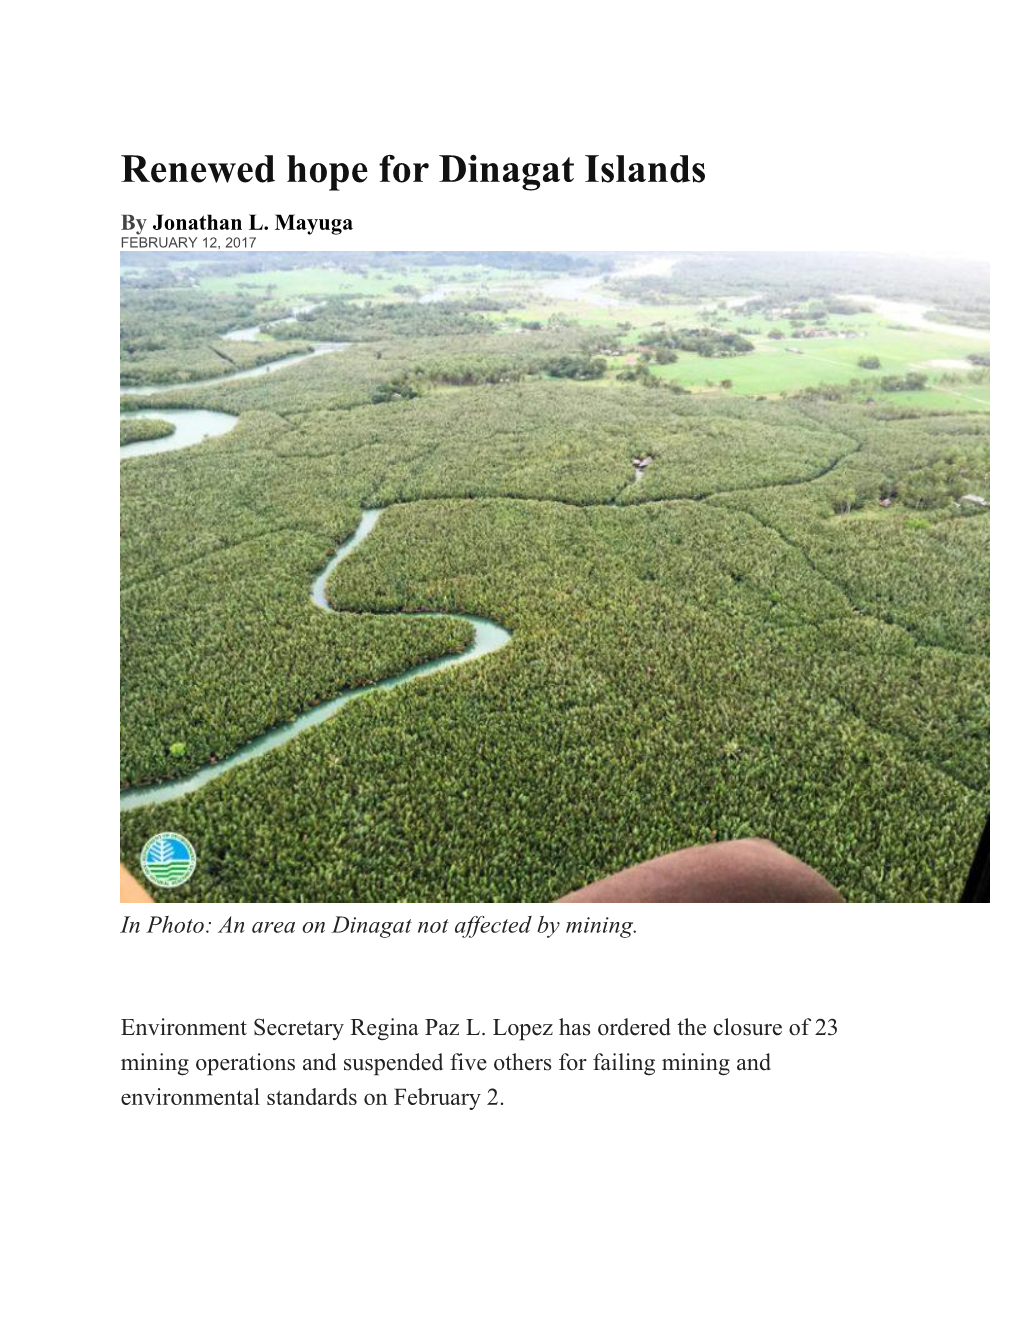 Renewed Hope for Dinagat Islands by Jonathan L